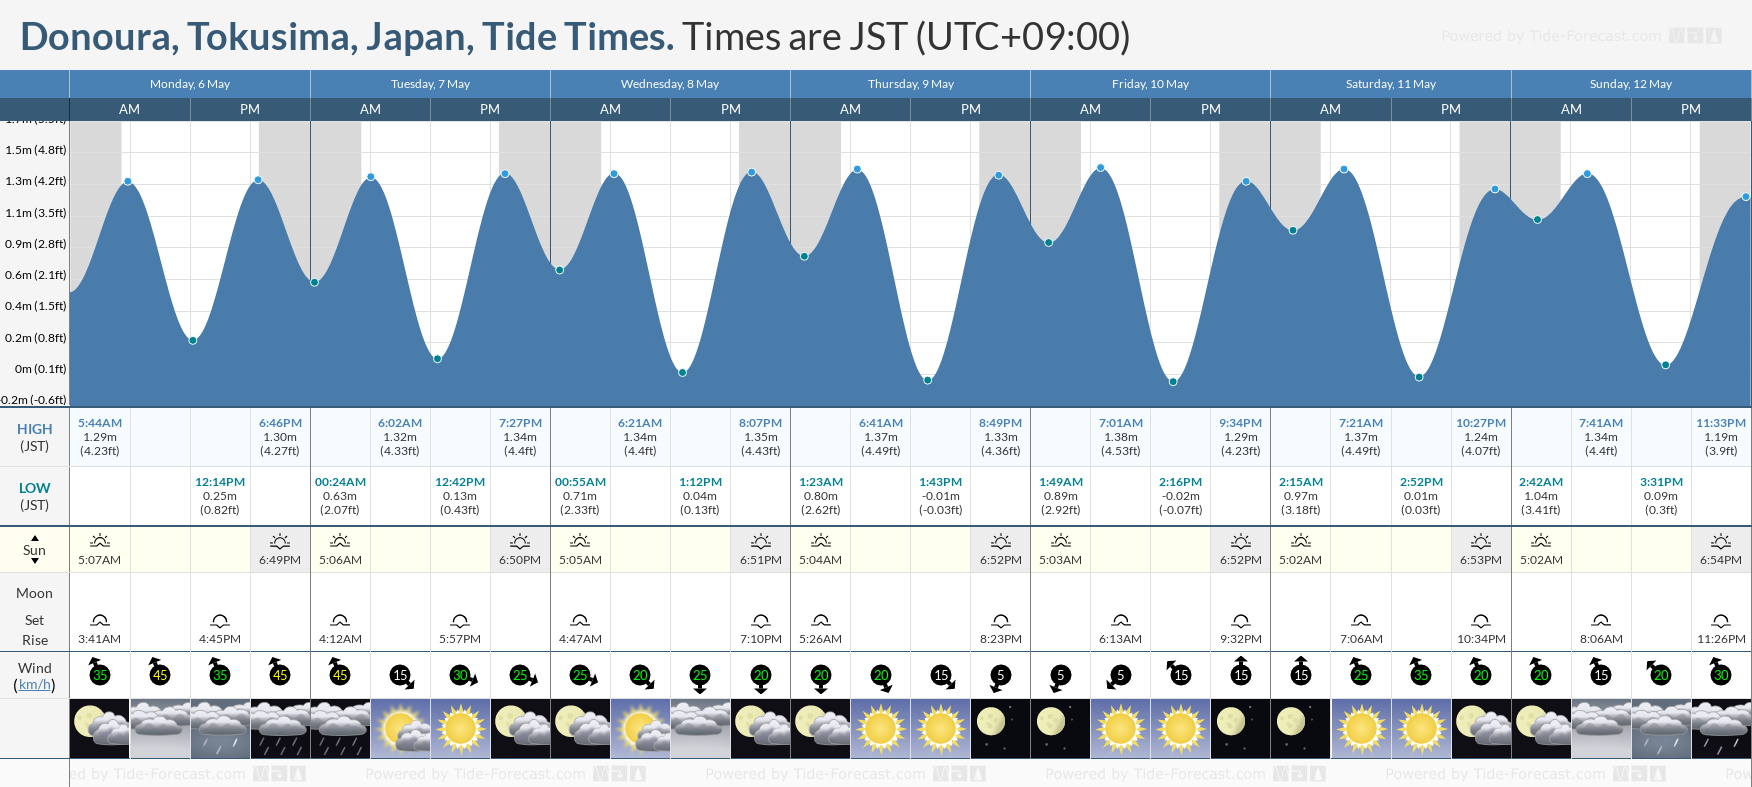 Donoura, Tokusima, Japan Tide Chart including high and low tide tide times for the next 7 days